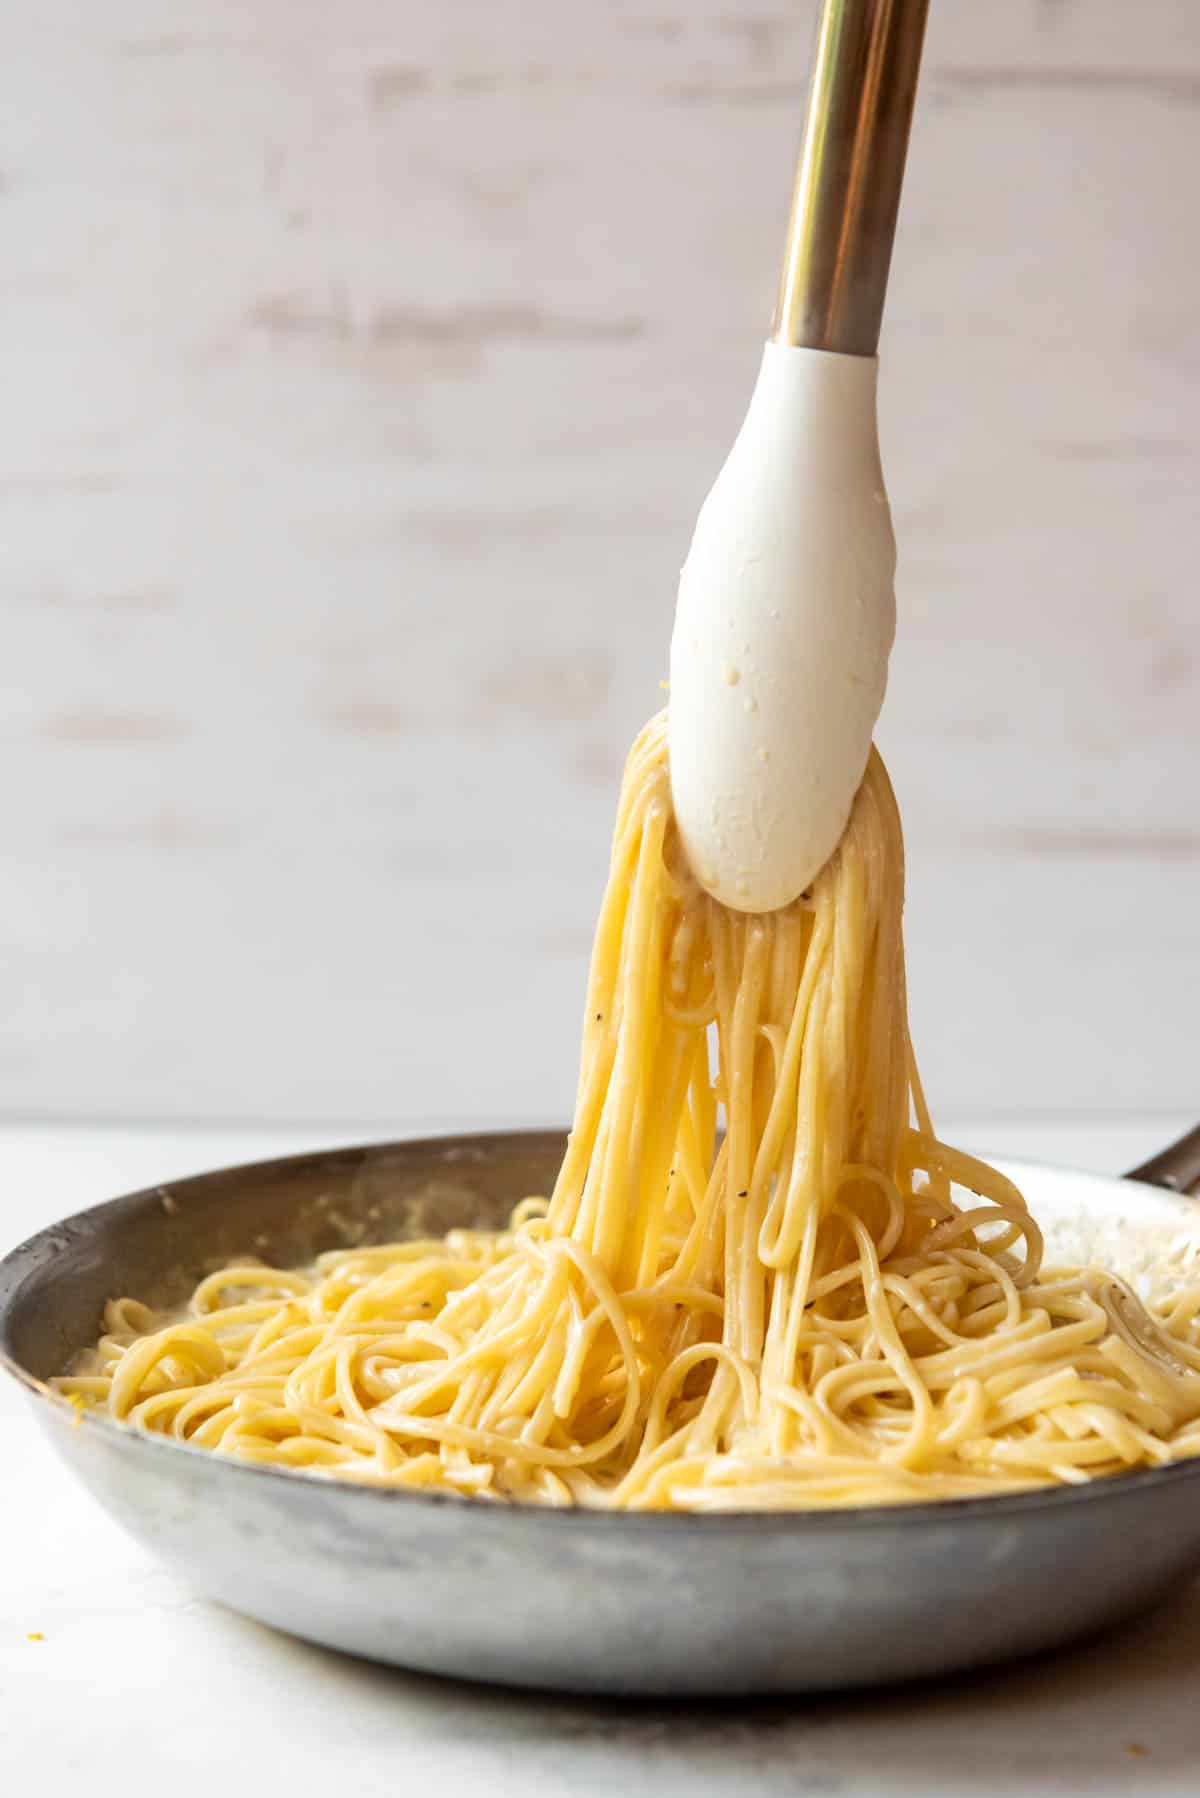 Tossing pasta with a creamy lemon sauce using tongs.